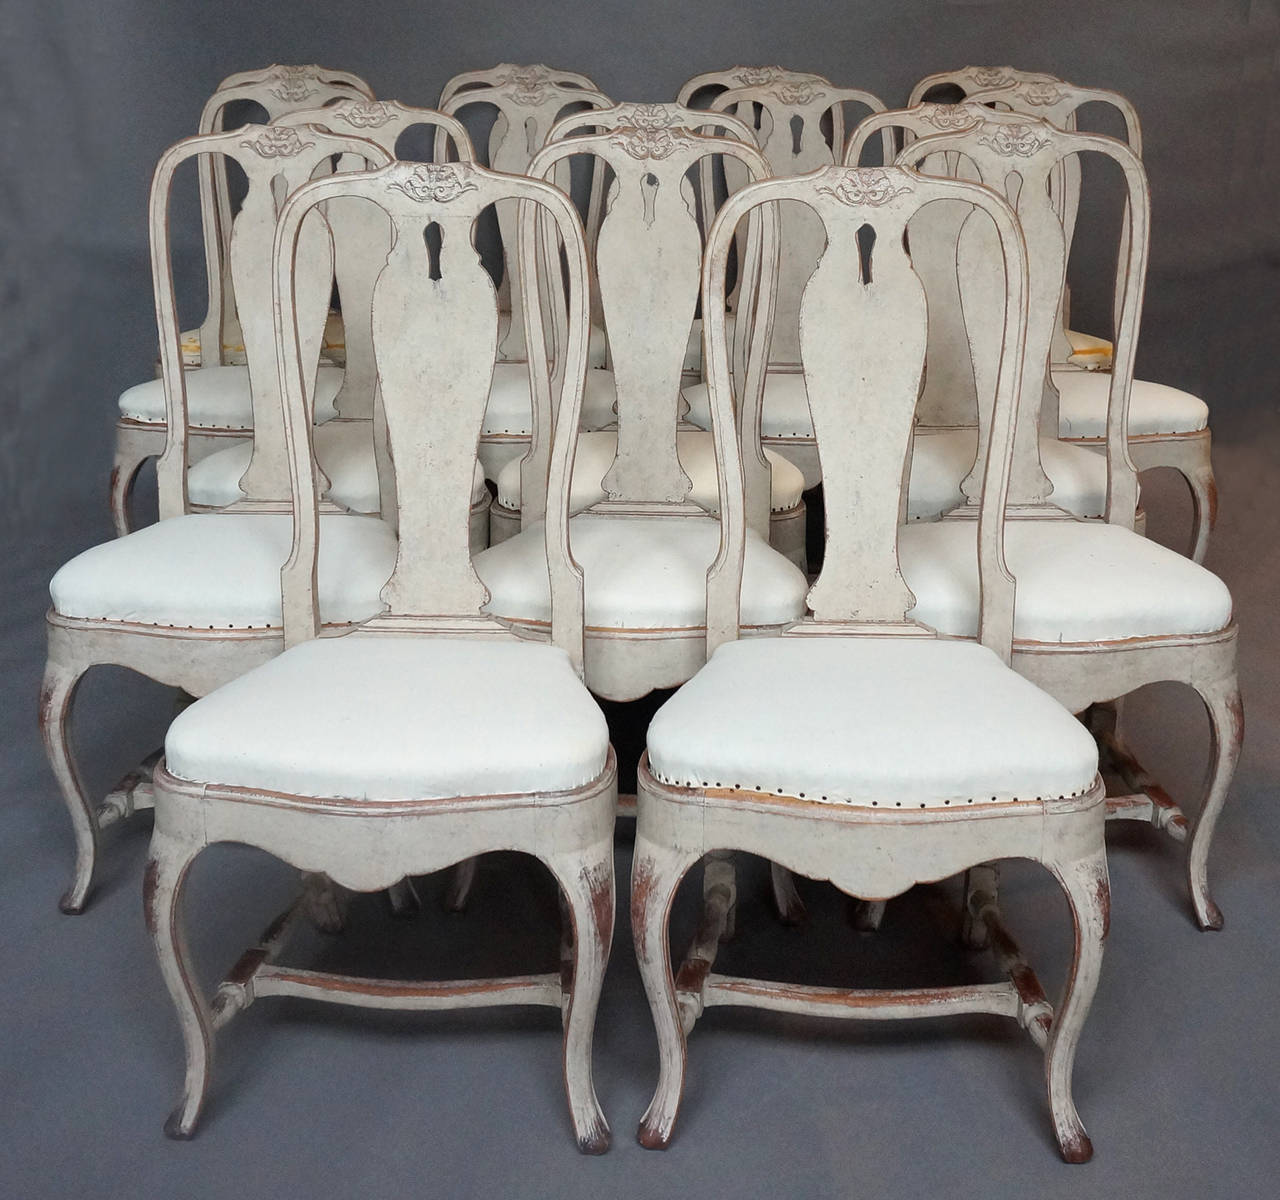 Set of 16 Swedish dining chairs, circa 1900, from the old Hotell Höjden in the islands east of Stockholm. Rococo style with cabriole legs, pierced splats with carved detail, slip seats and H-shaped stretchers.